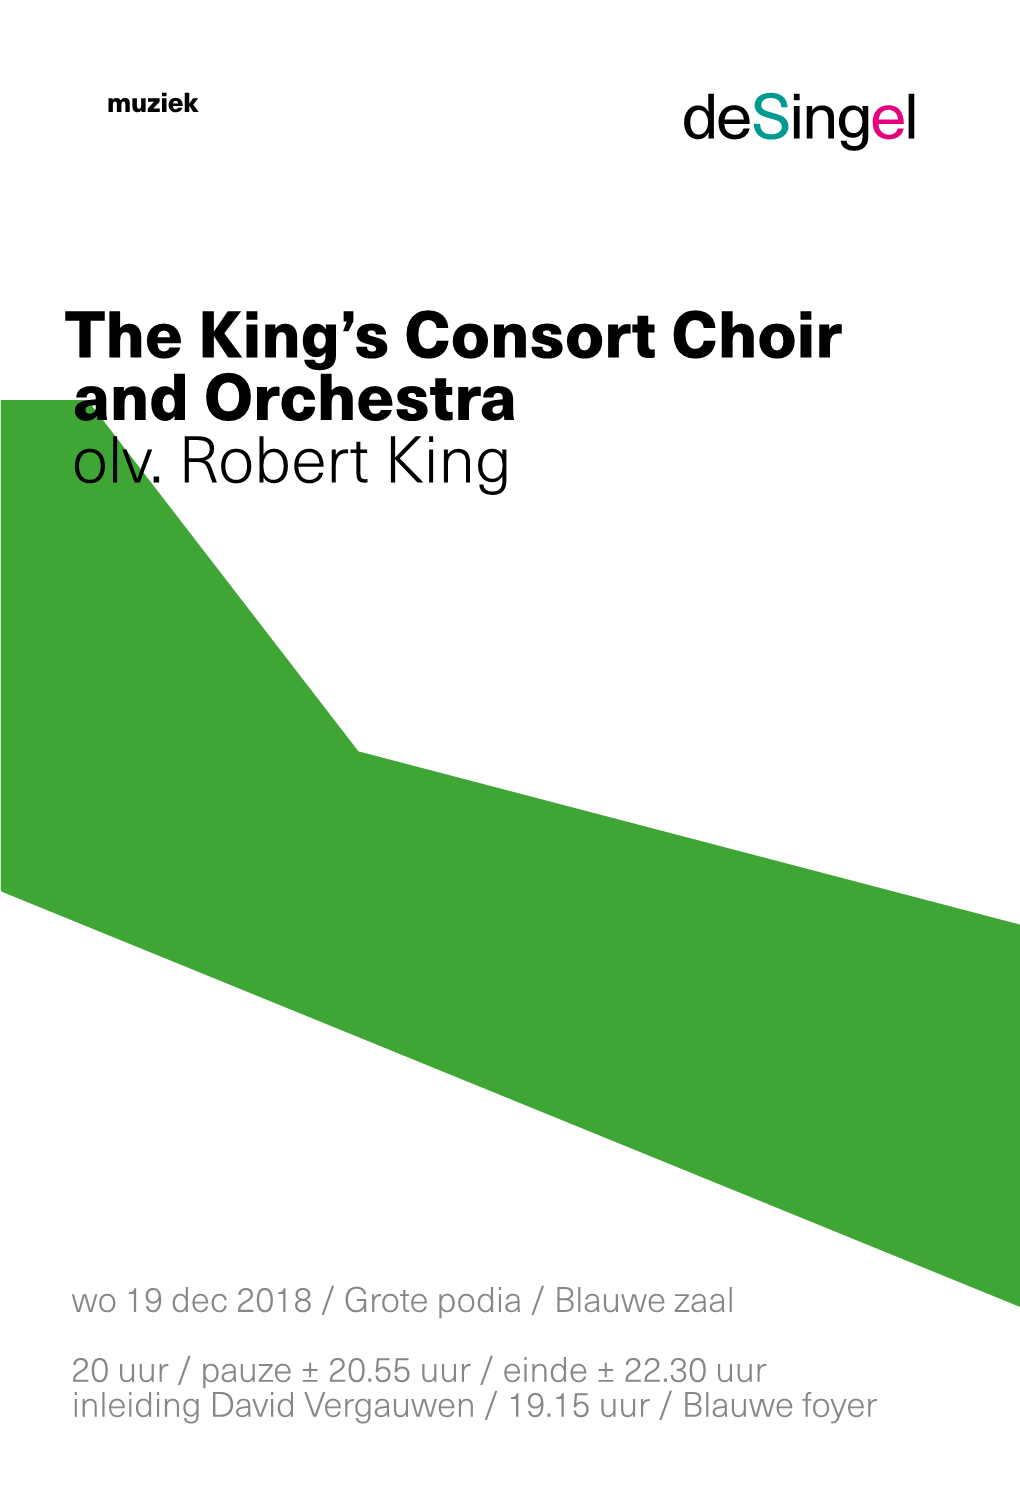 The King's Consort Choir and Orchestra Olv. Robert King